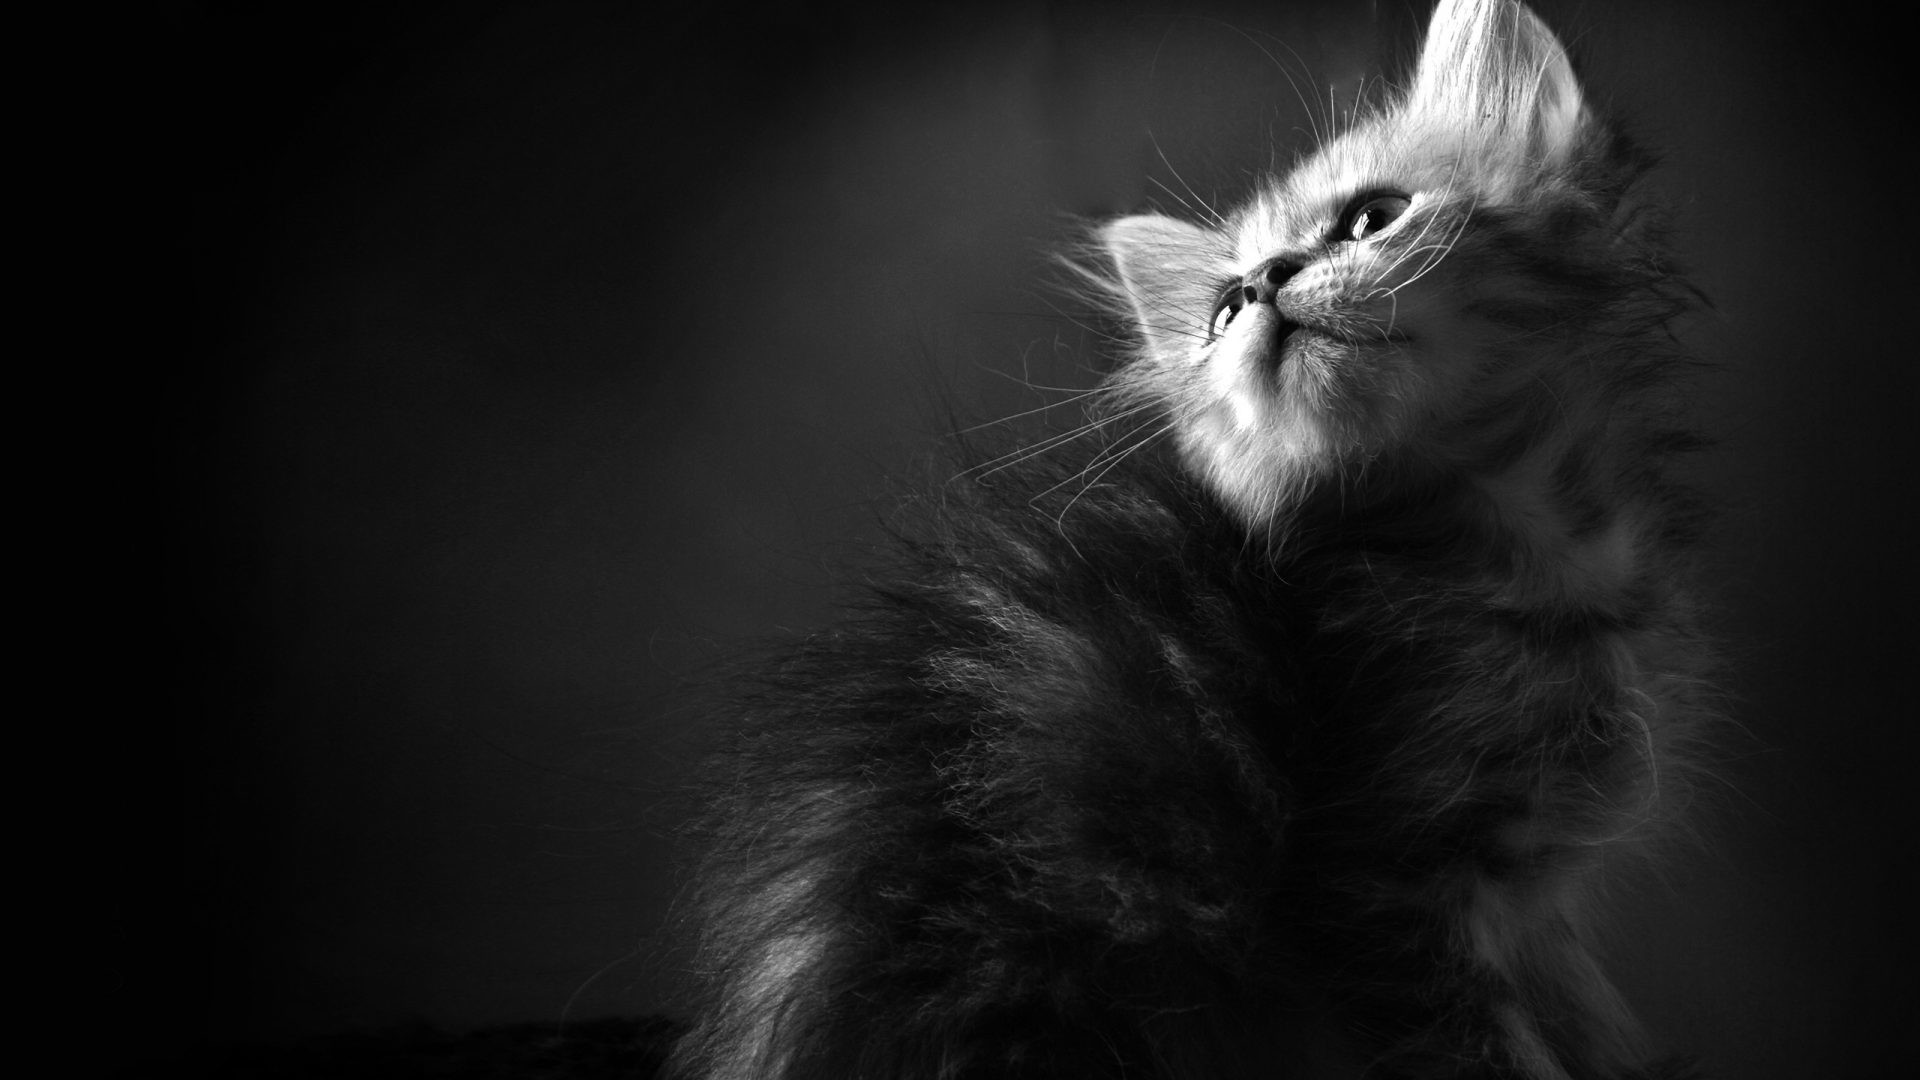 1920x1080 Cats - Kittens Wallpapers Of Cat for HD 16:9 High Definition 1080p 900p 720p